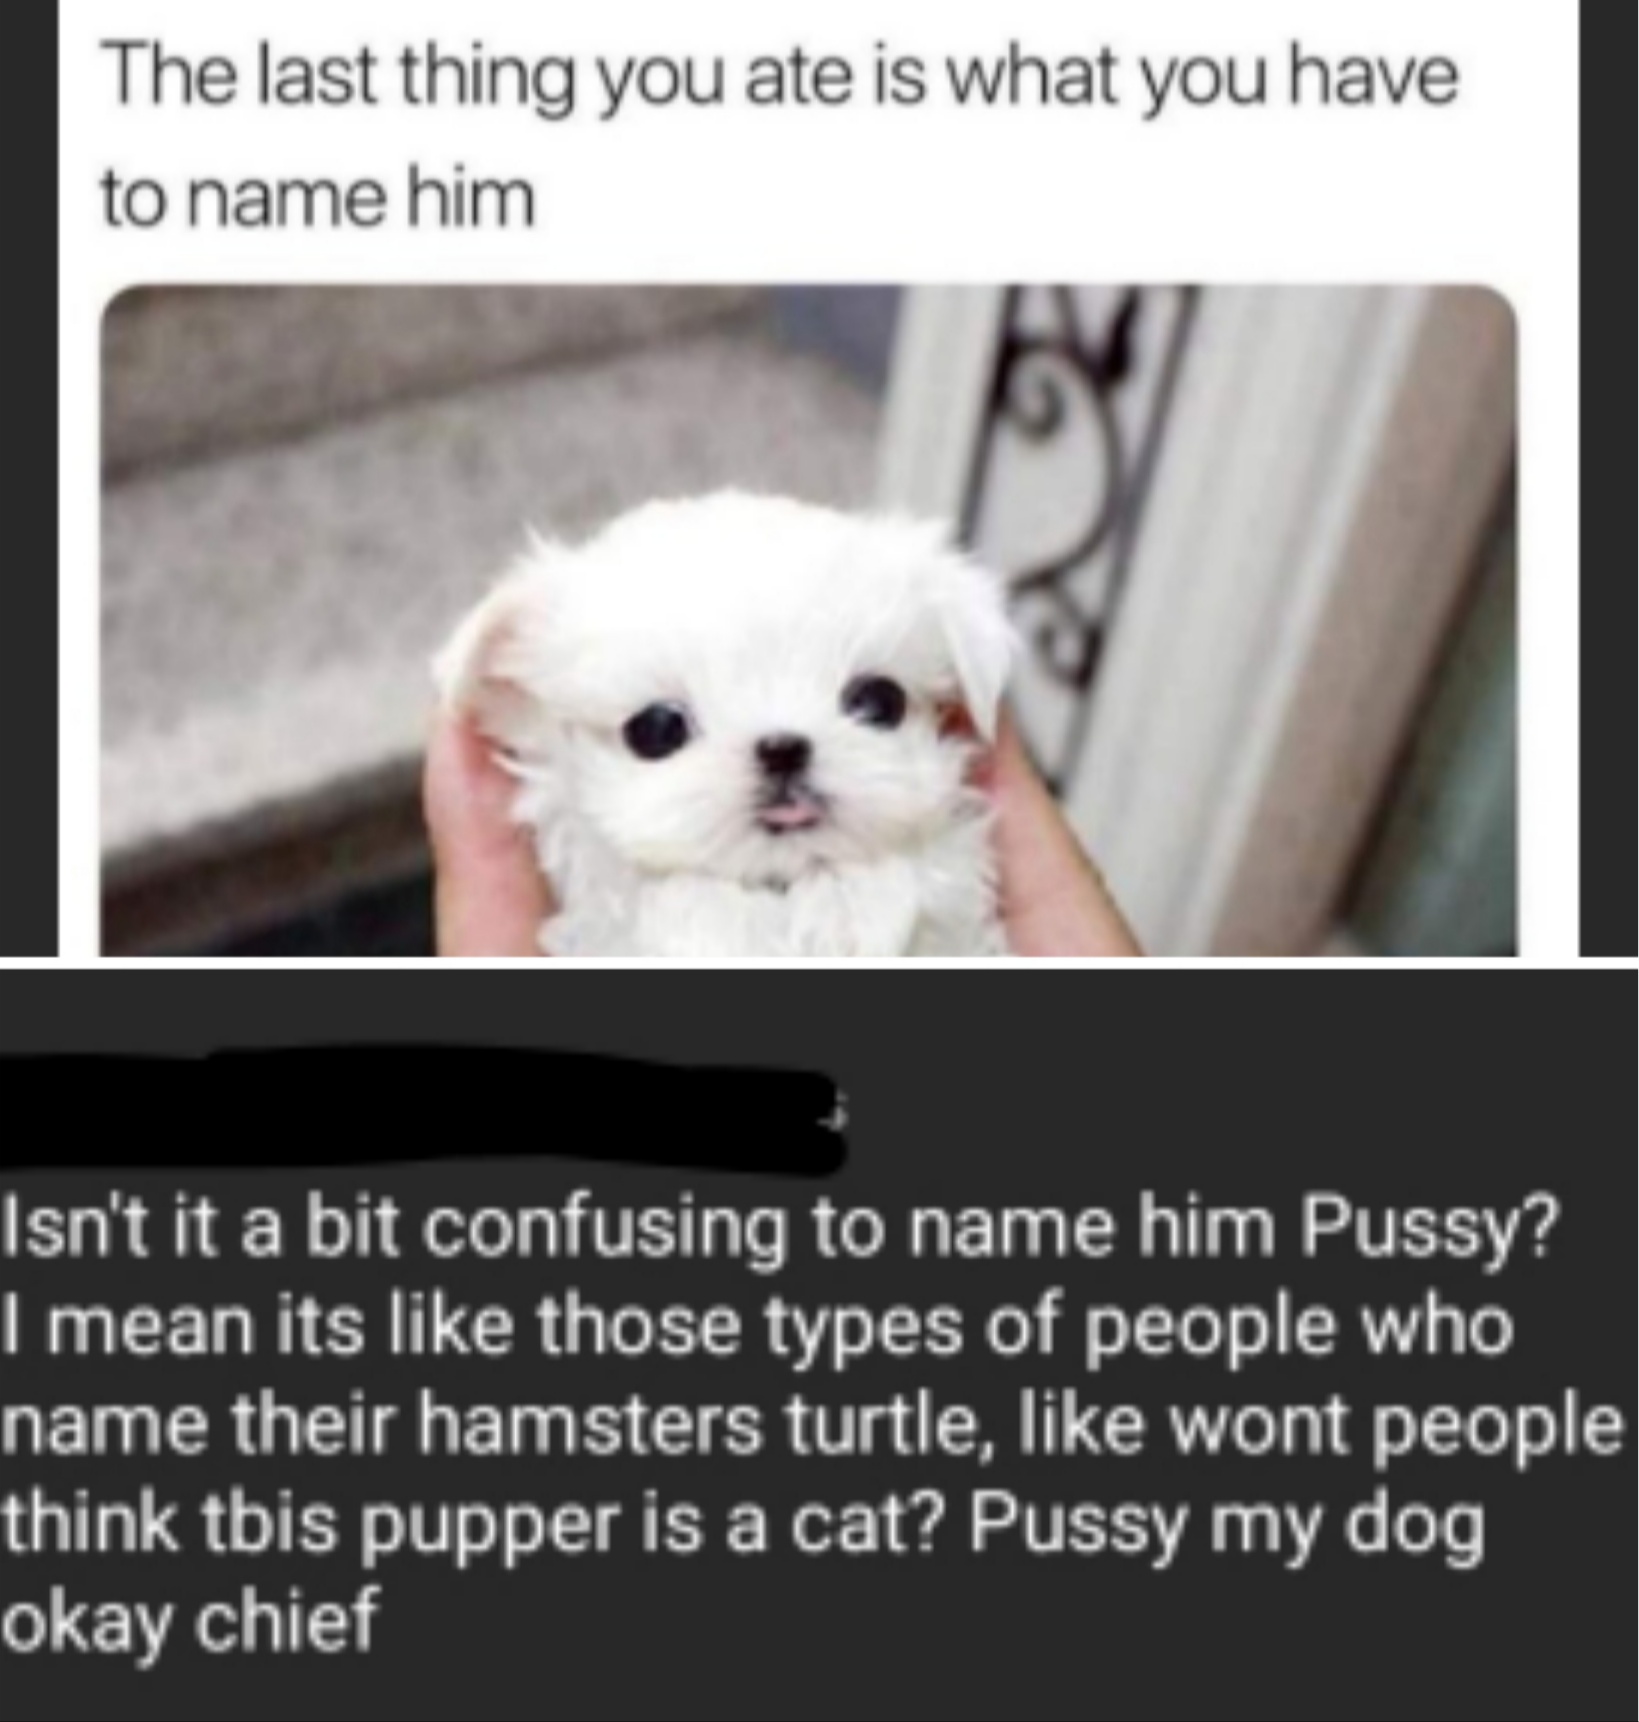 last thing you ate is what you have to name him - The last thing you ate is what you have to name him Isn't it a bit confusing to name him Pussy? I mean its those types of people who name their hamsters turtle, wont people think tbis pupper is a cat? Puss